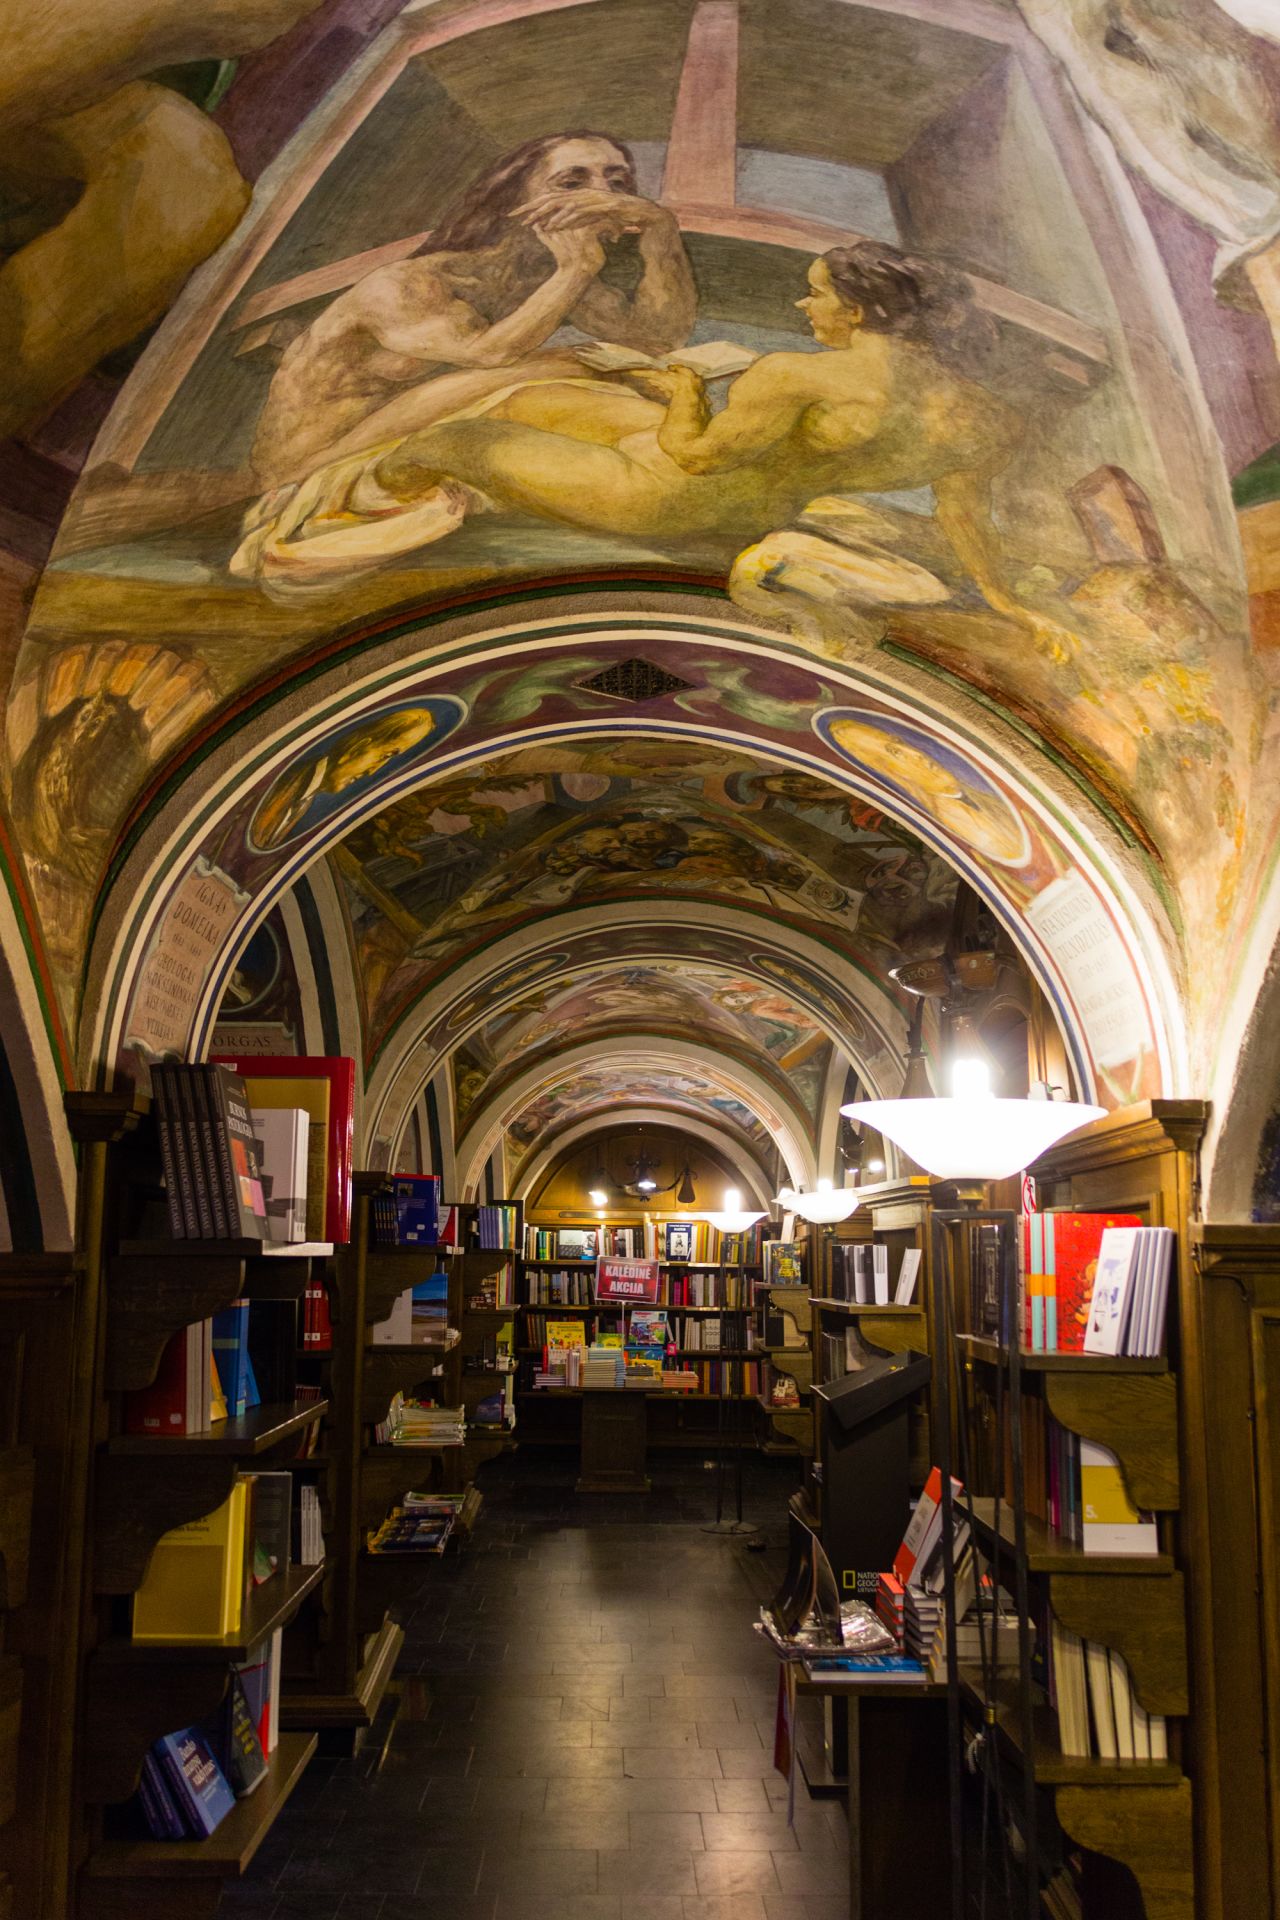 With its baroque arches and frescoed ceilings, the Littera Book Store, at Vilnius University, looks more like the <a href="http://www.bodleian.ox.ac.uk/bodley" target="_blank" target="_blank">Bodleian Library </a>than a Barnes and Noble.